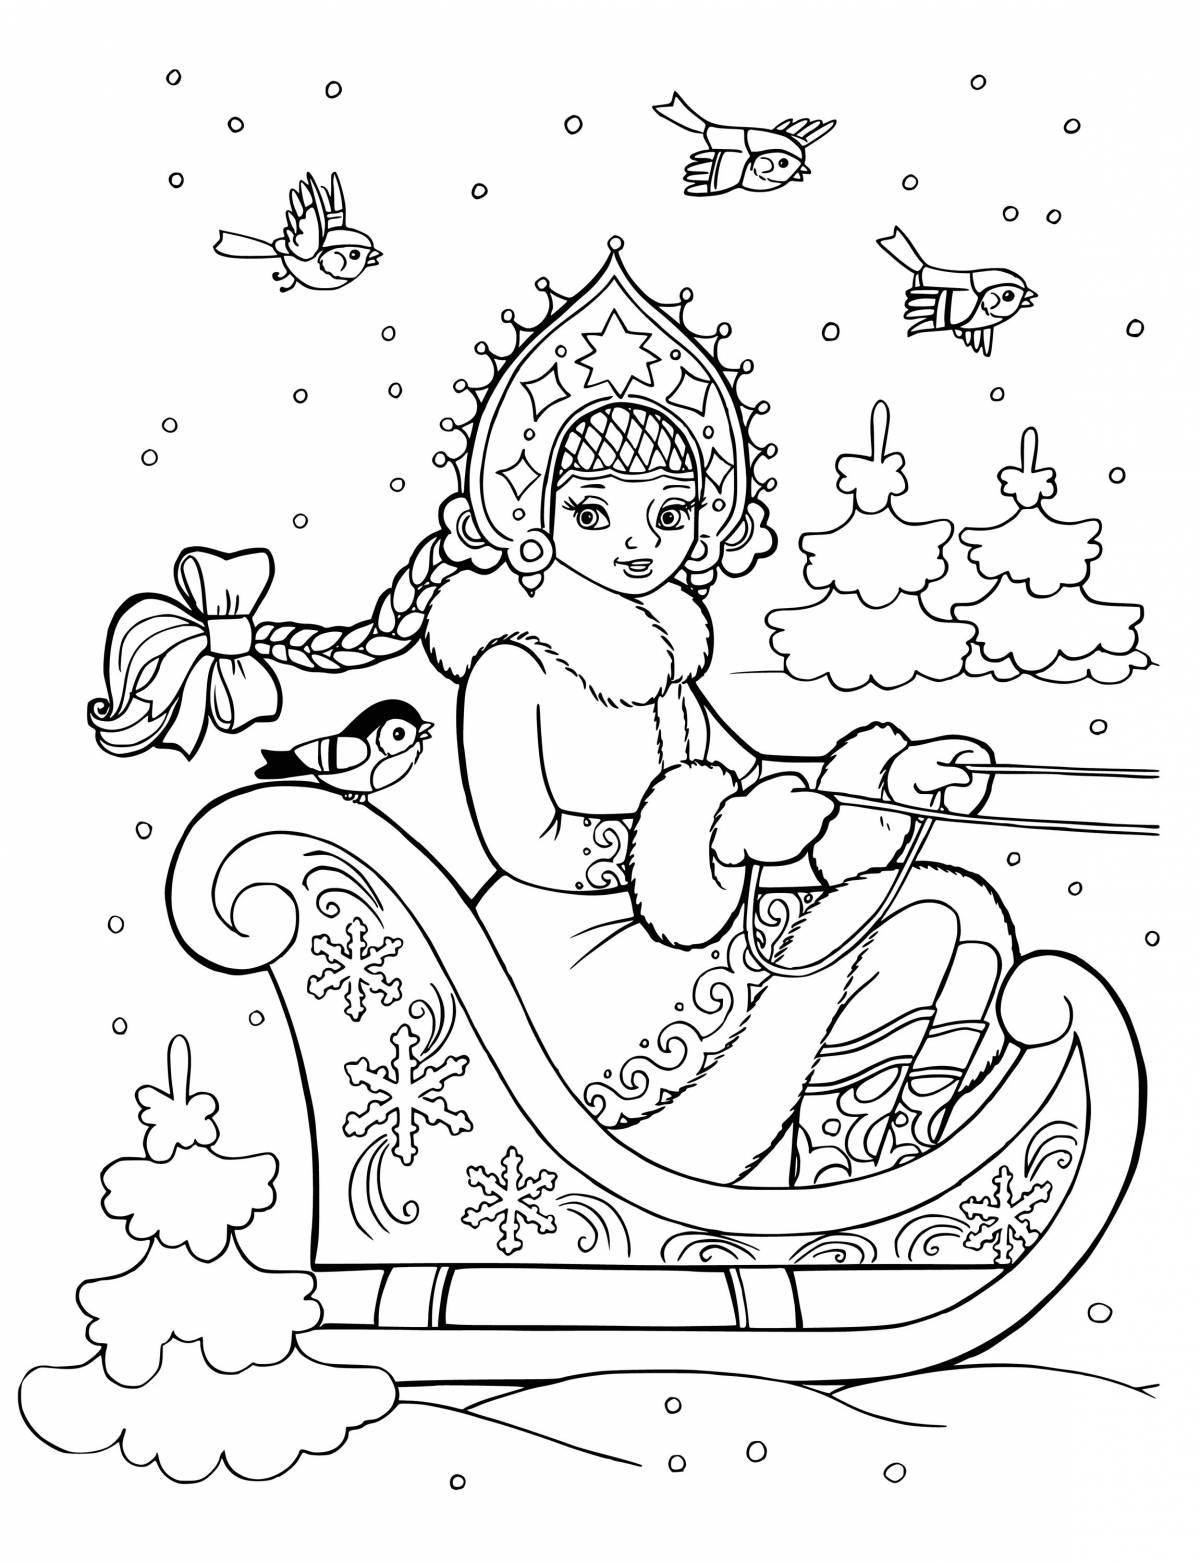 Wonderful coloring drawing of a Snow Maiden